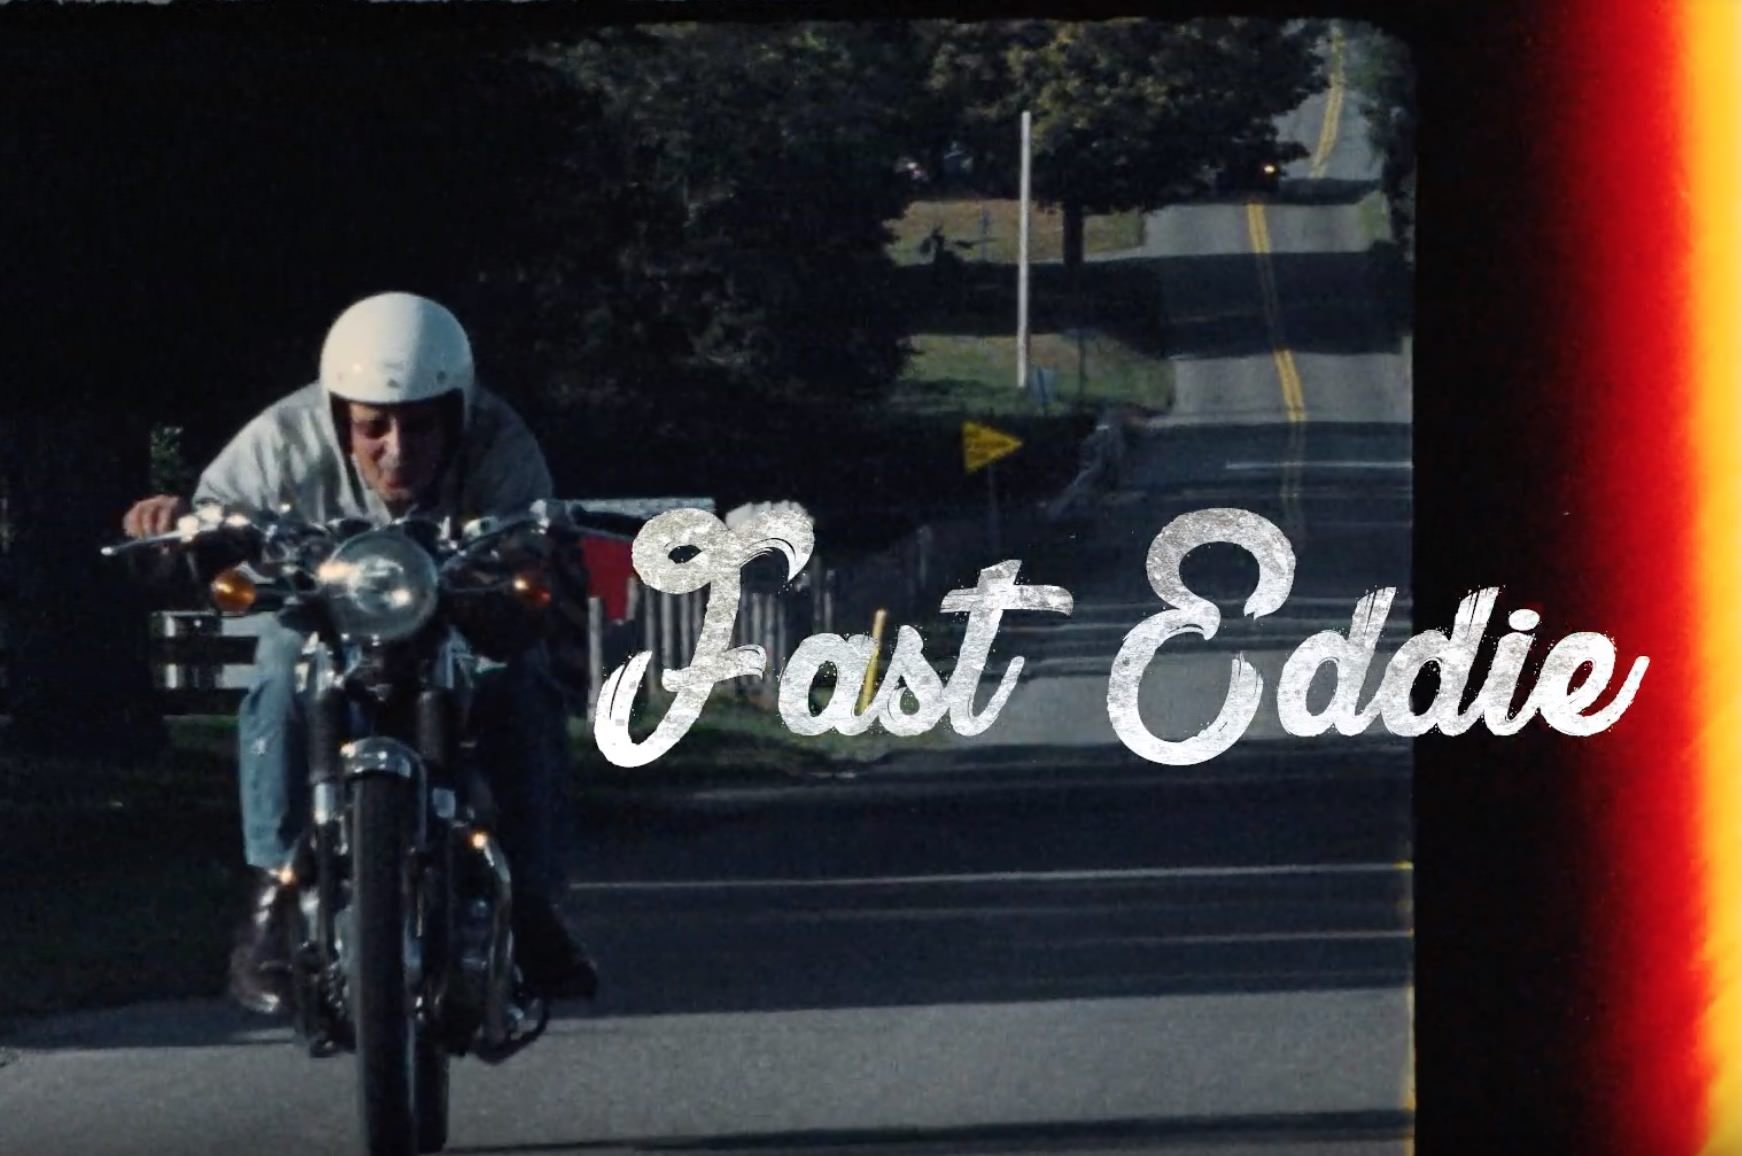 Fast Eddie - A Short Film About A Lifelong Passion